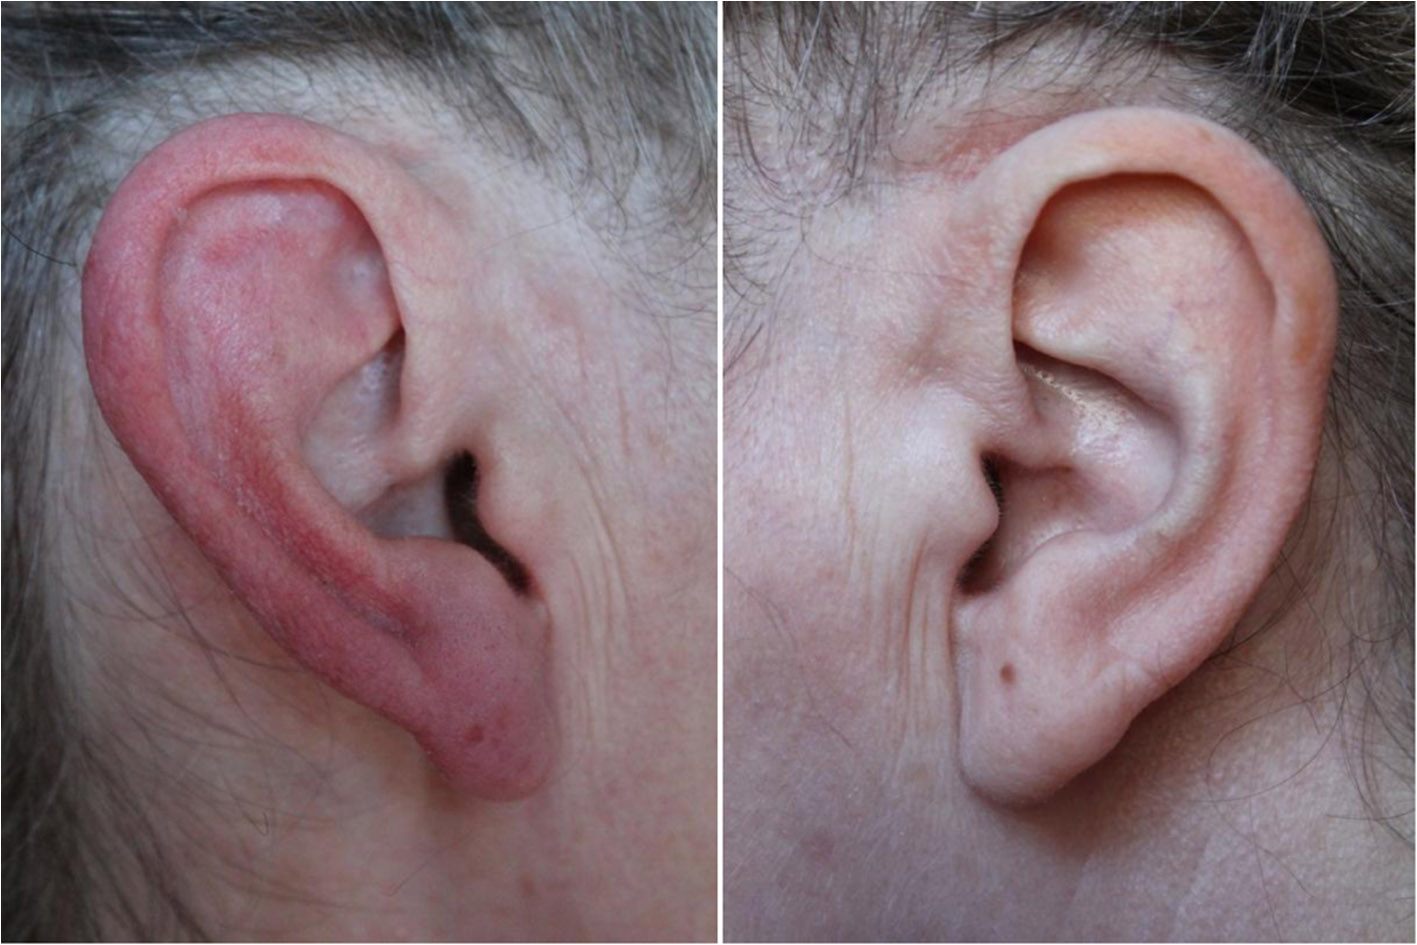 File:Red ear syndrome.jpg - Wikimedia Commons